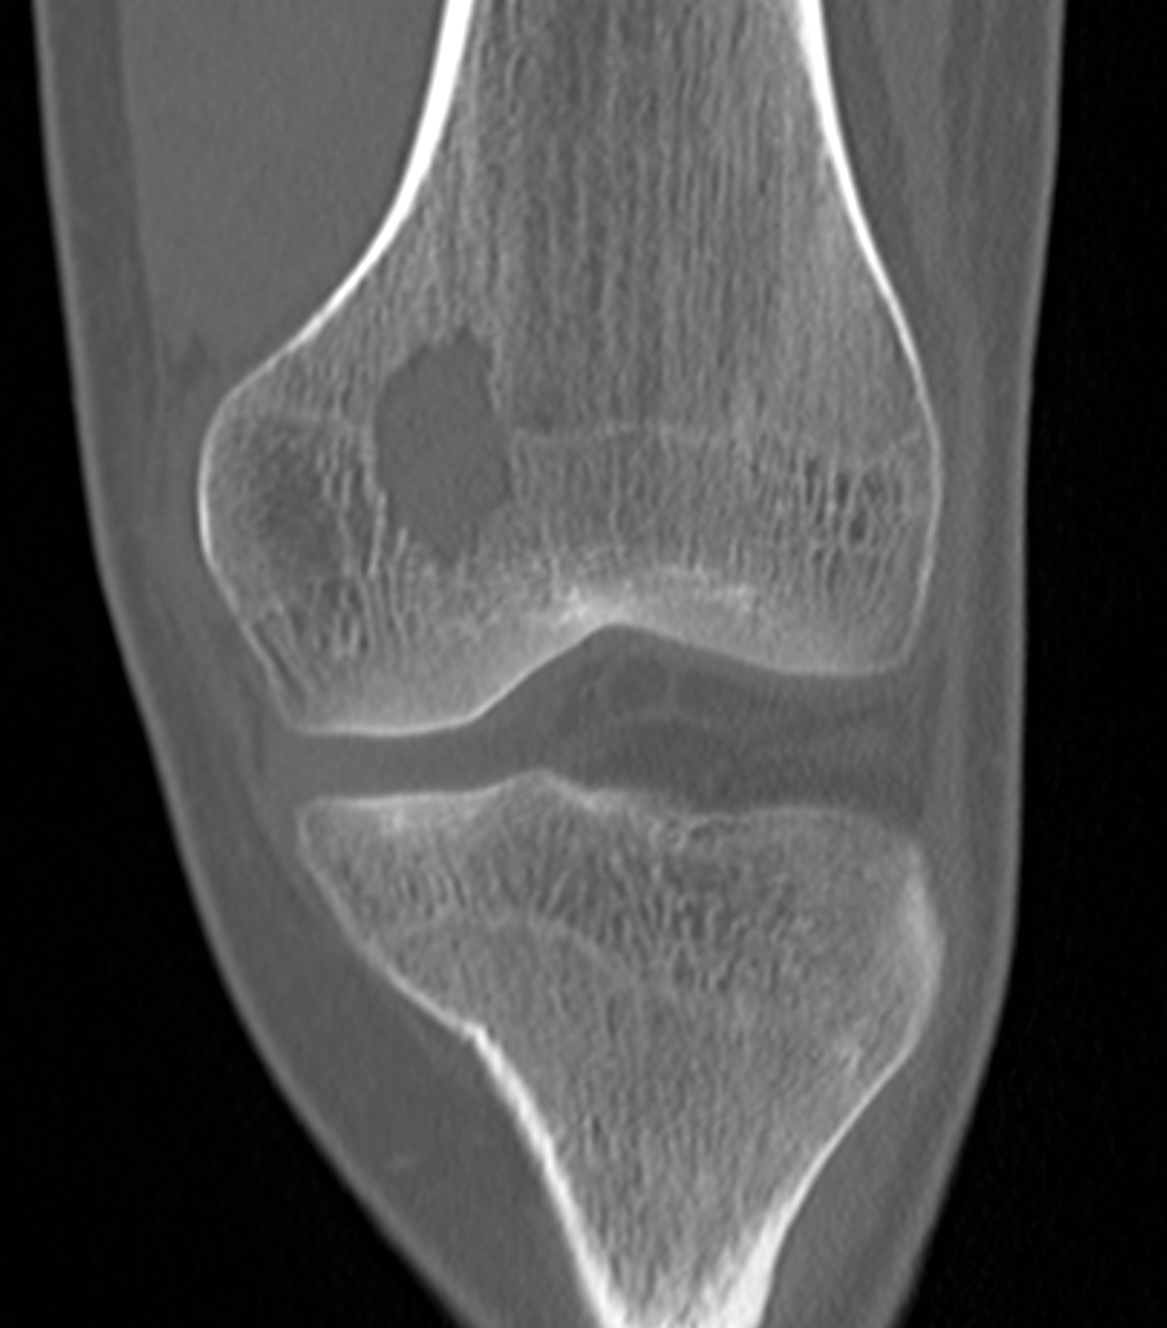 Coronal CT demonstrates a lytic lesion within the physis/epiphysis of the distal femur.